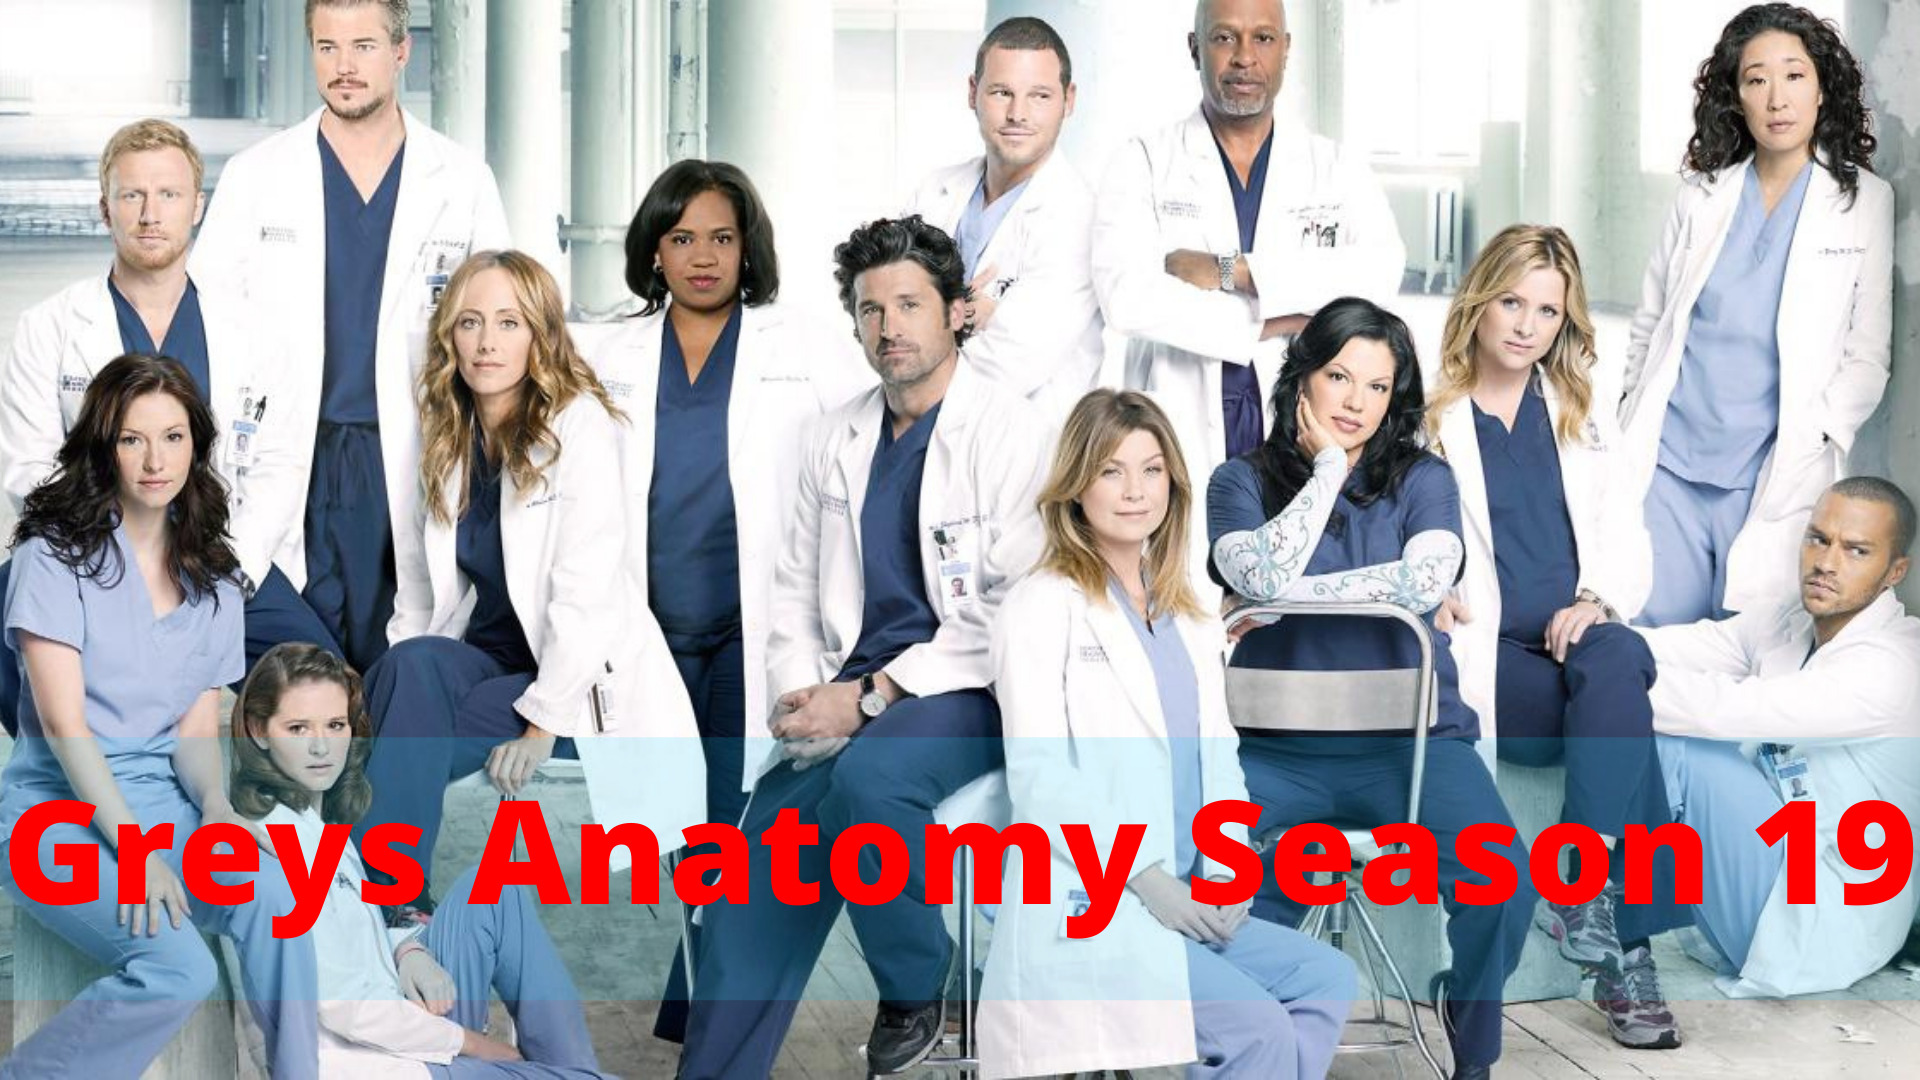 When Is Greys Anatomy Season 19 Coming Out? (Release Date)